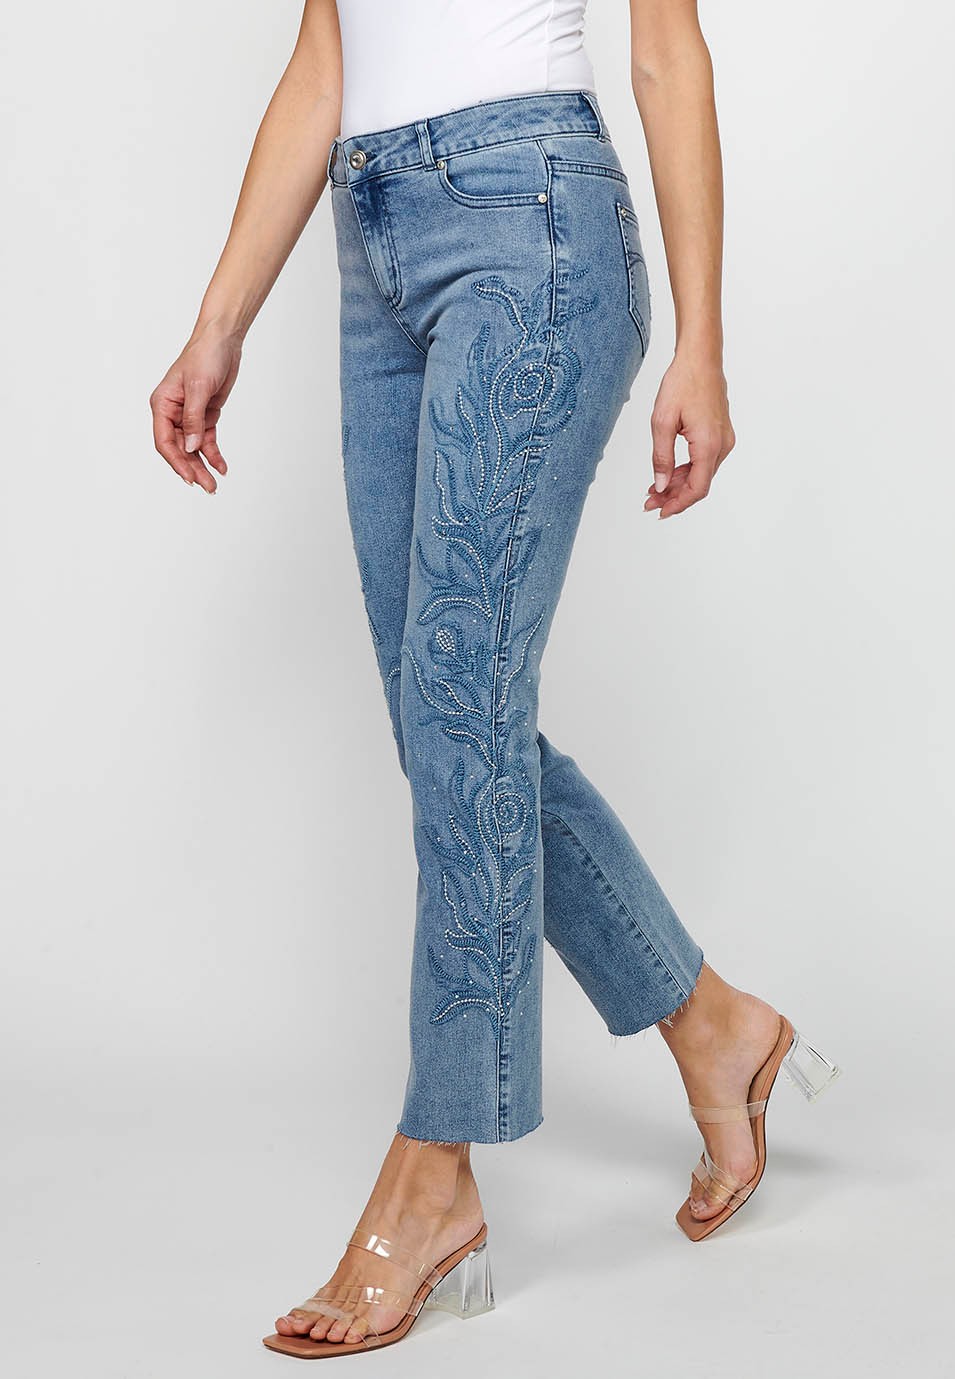 Long flared denim pants with front zipper closure and light blue floral embroidered details for women 3